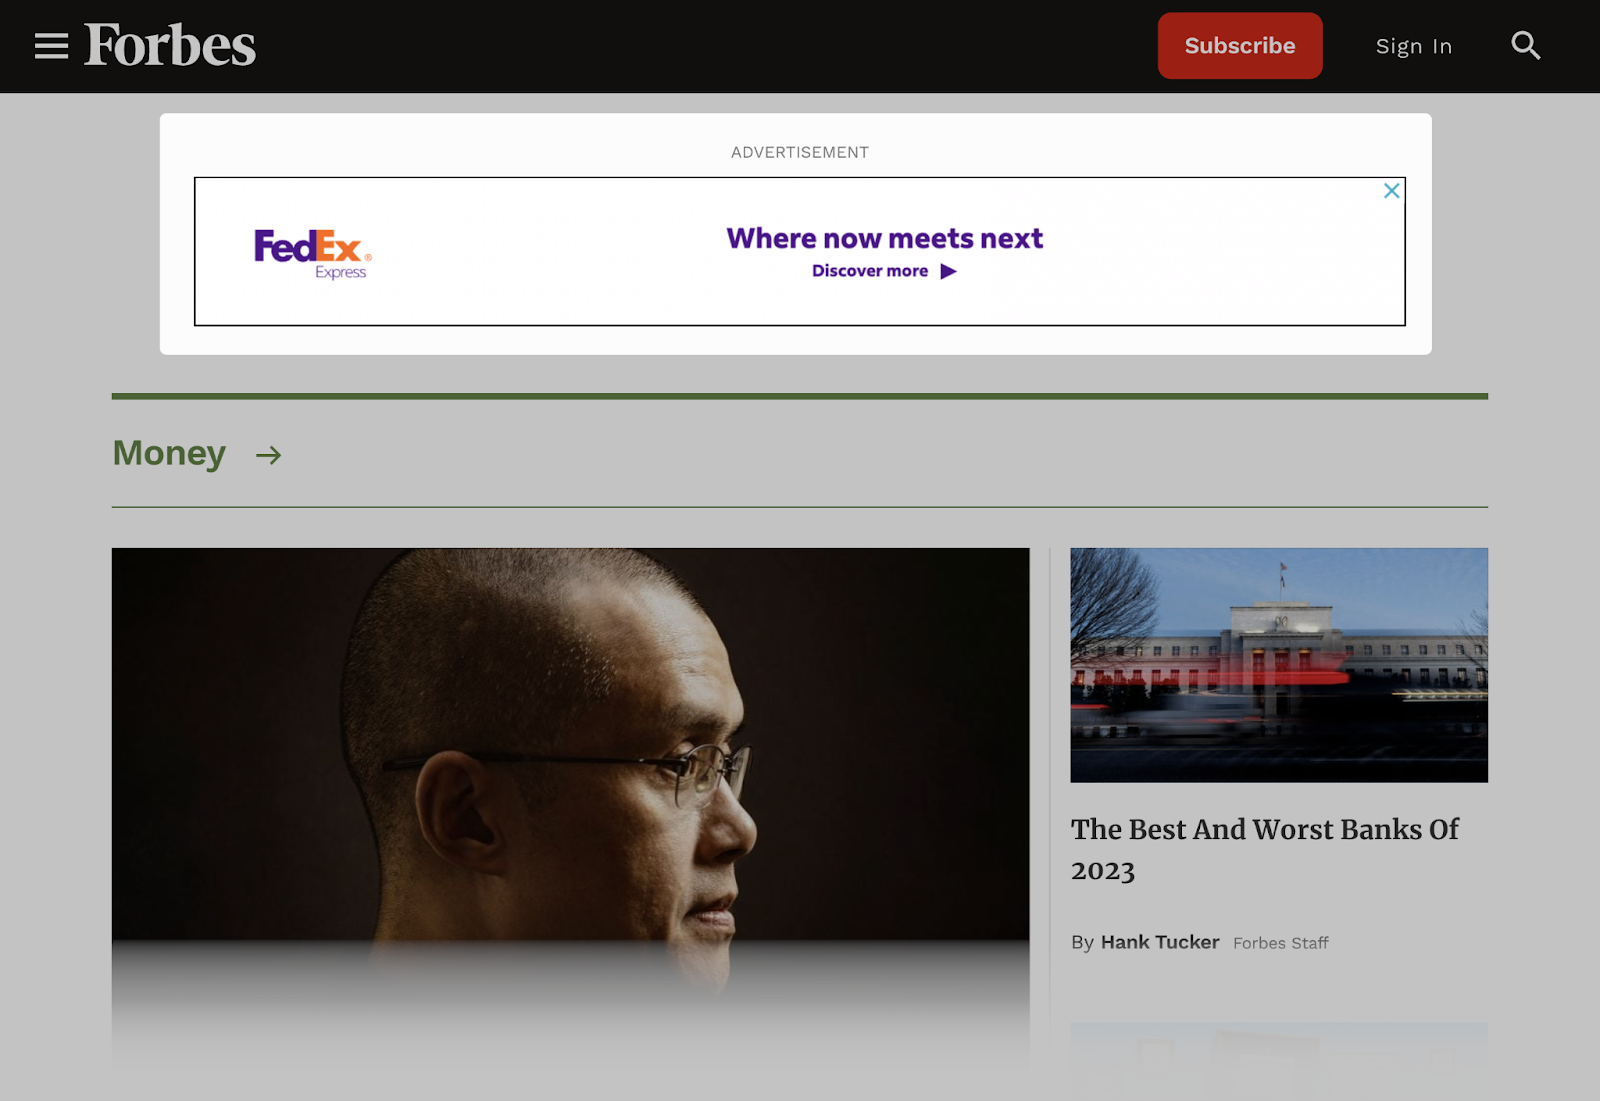 FedEx advertisement  showing connected  Forbes' website